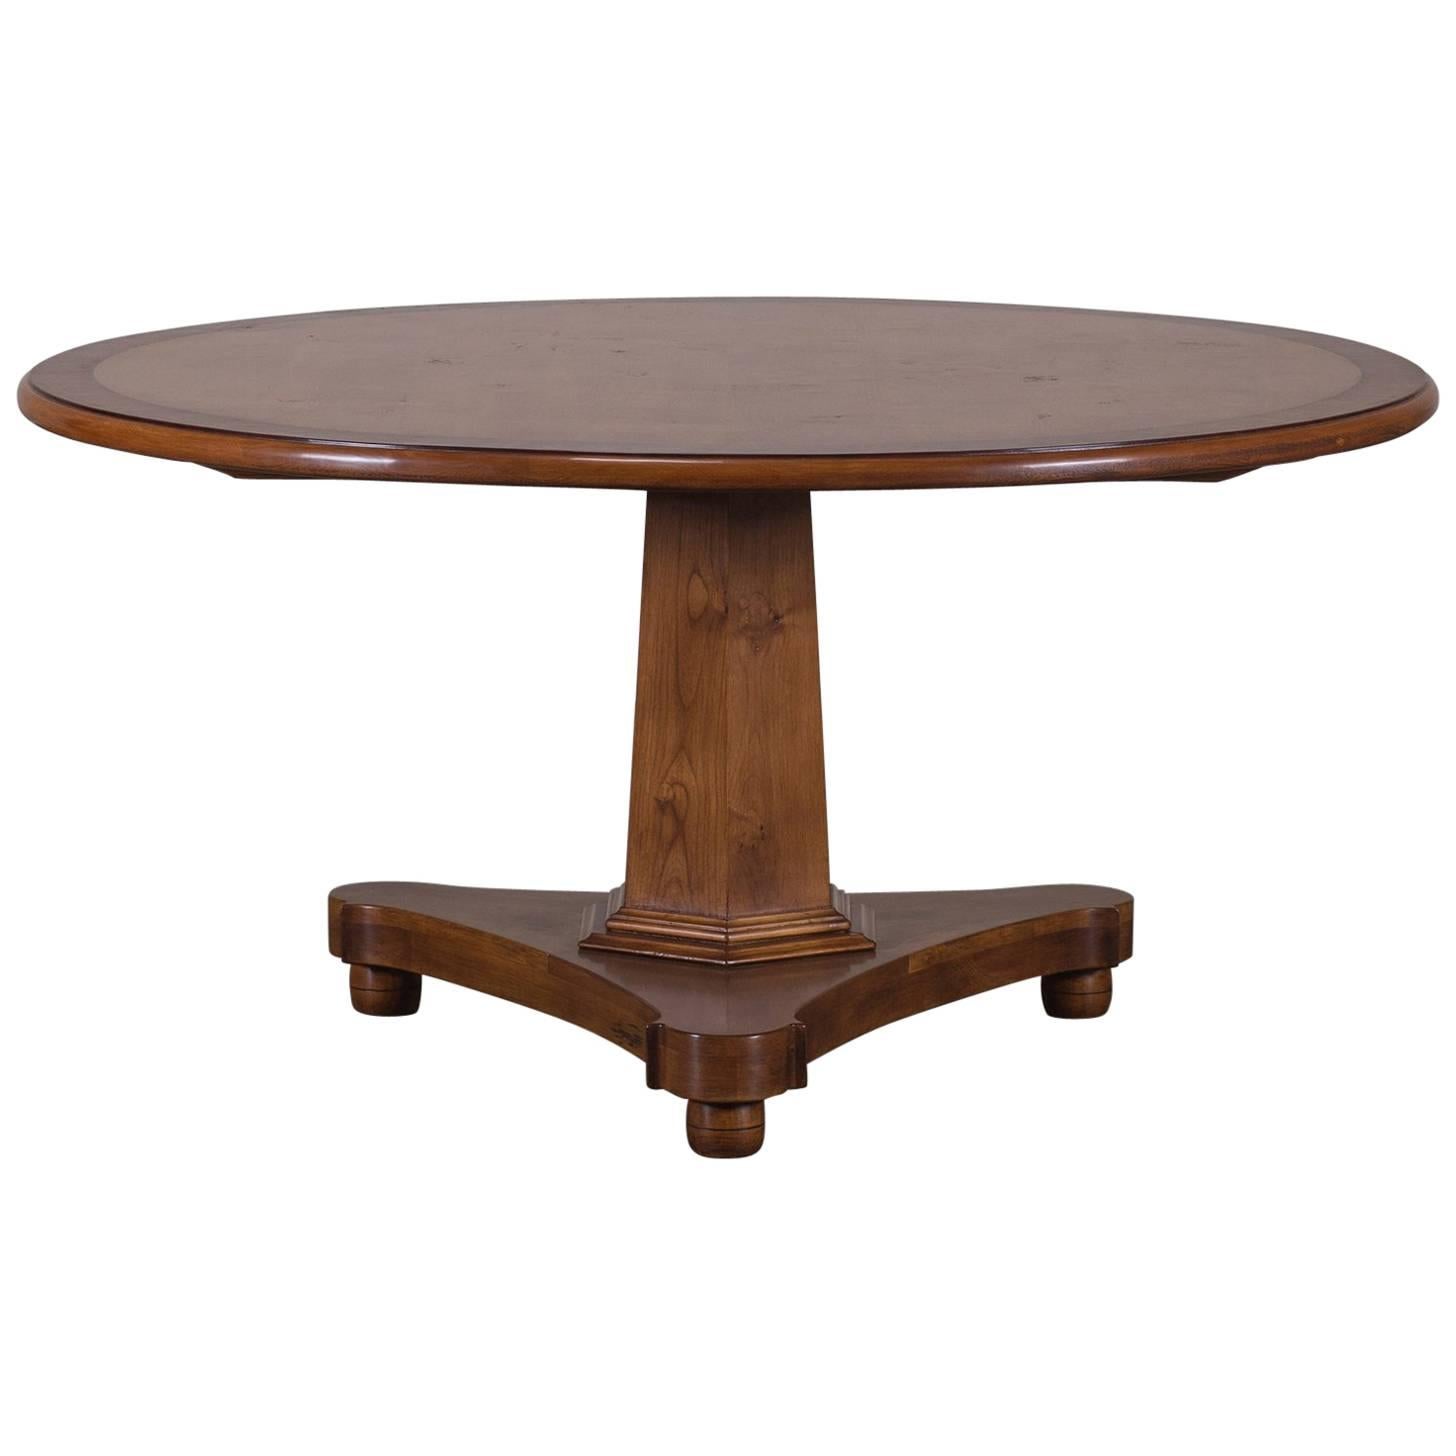 English Regency Style Cherrywood Round Pedestal Dining Table